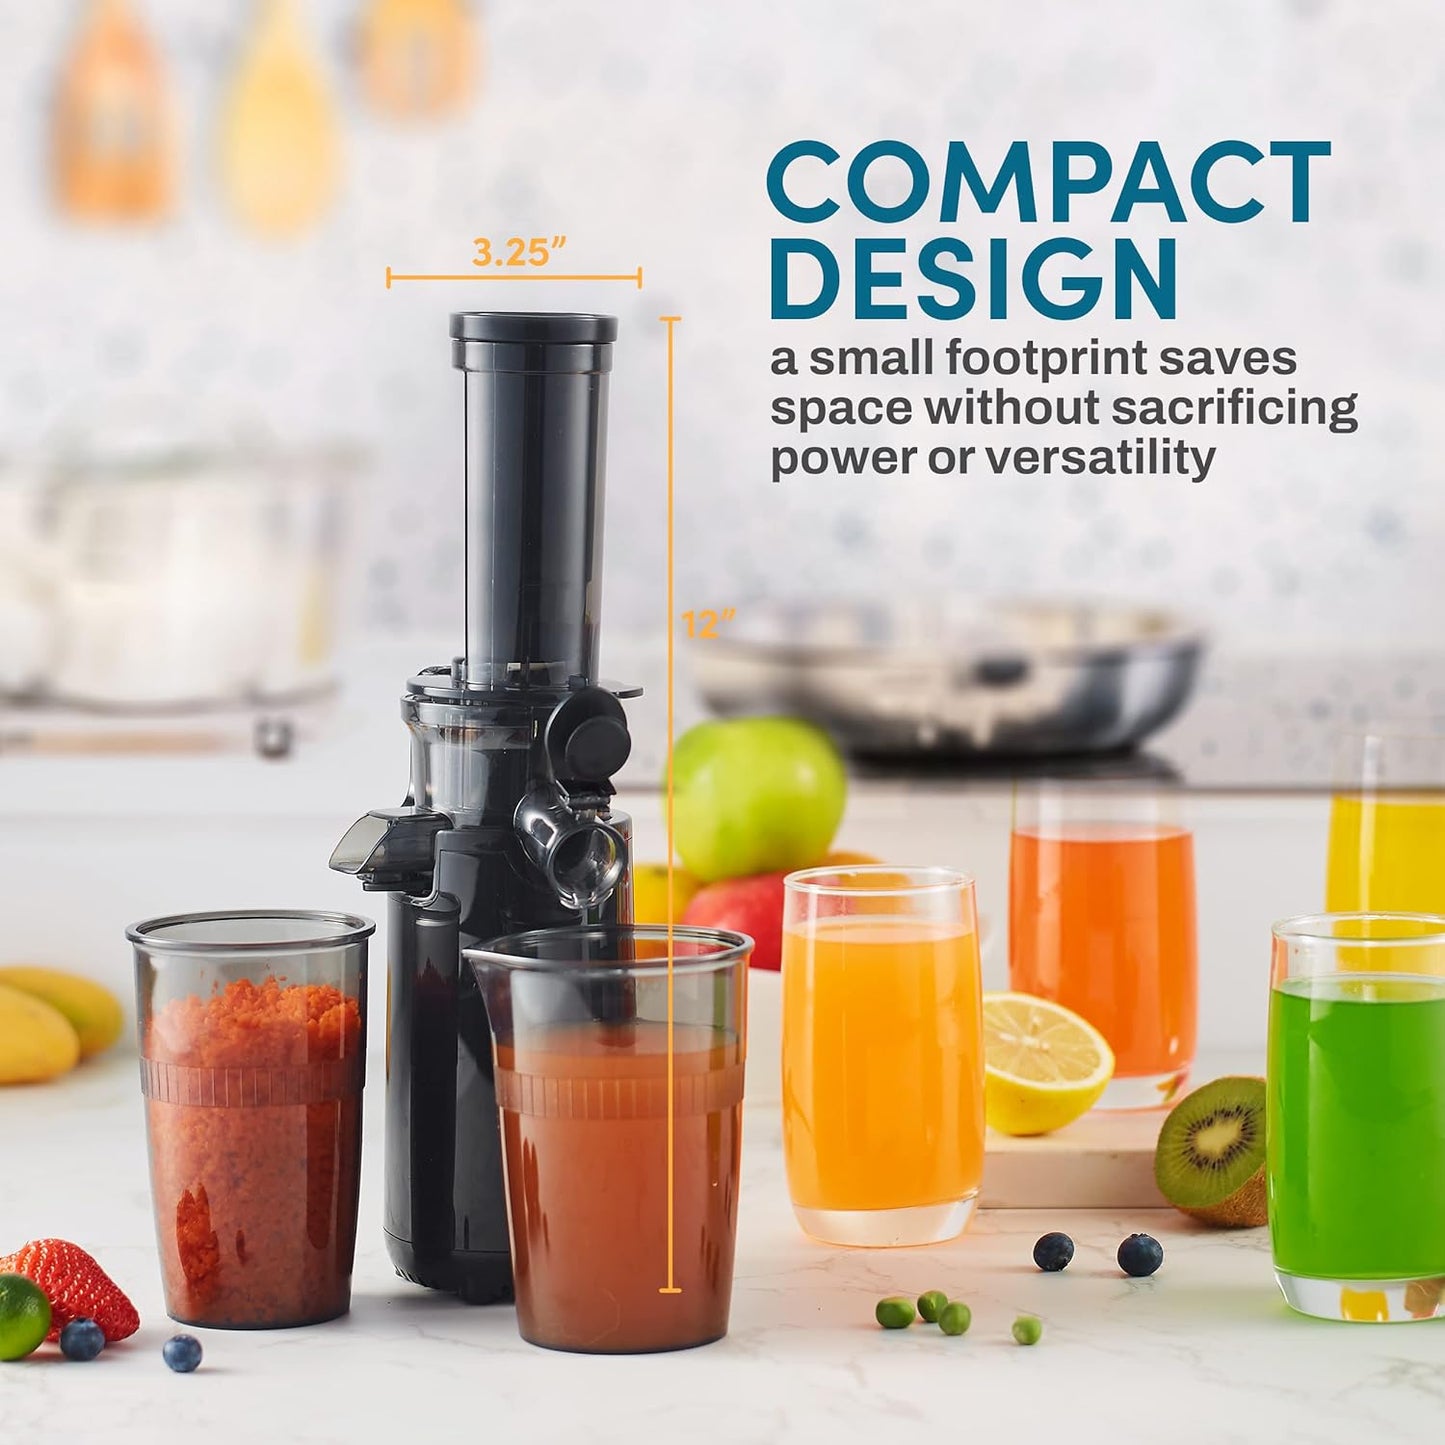 Elite Gourmet EJX600 Compact Masticating Slow Juicer, Cold Press Juice Extractor, Nutrient and Vitamin Dense, Easy to Clean, 16 oz Juice Cup